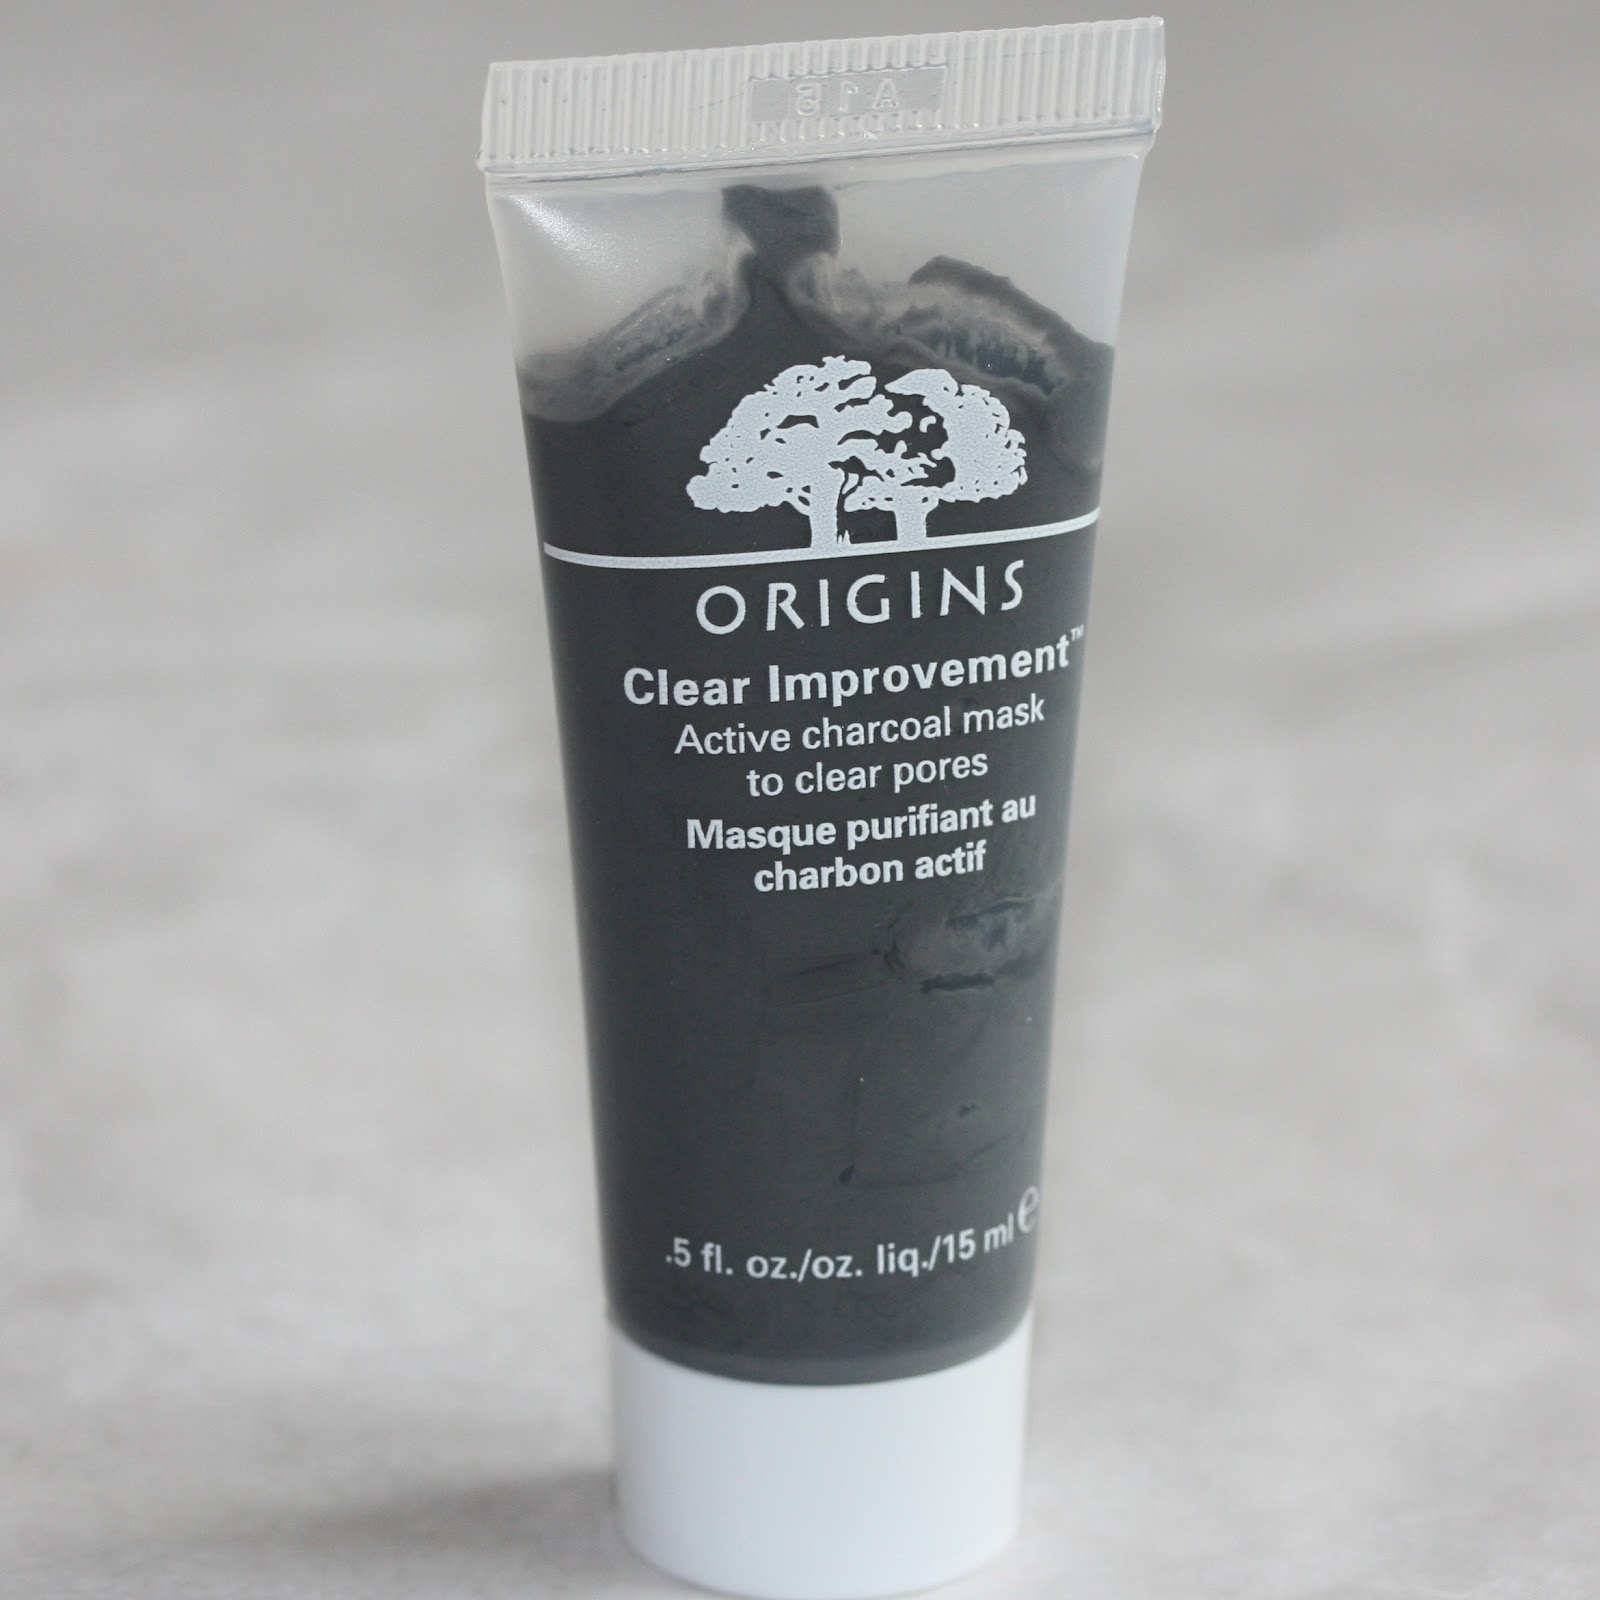 Origins Clear Improvement Active Charcoal Mask to Clear Pores  Swatch